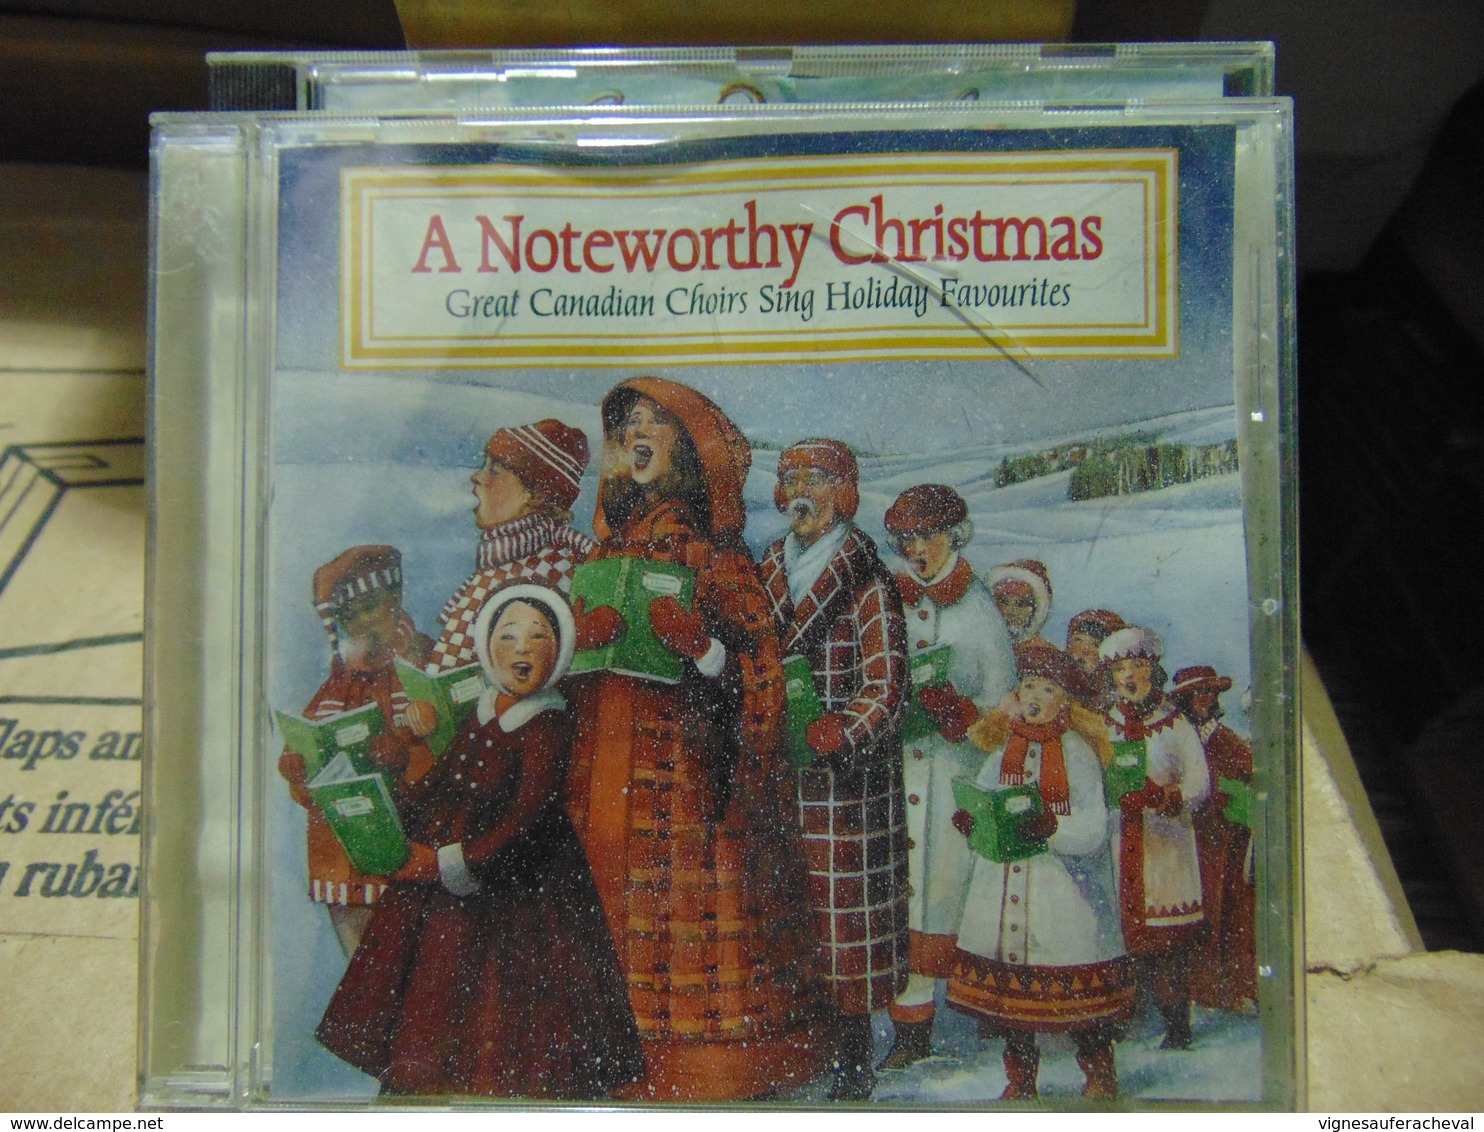 Great Canadian Choirs Sing Holiday Favorites/A Noteworthy Christmass - Weihnachtslieder